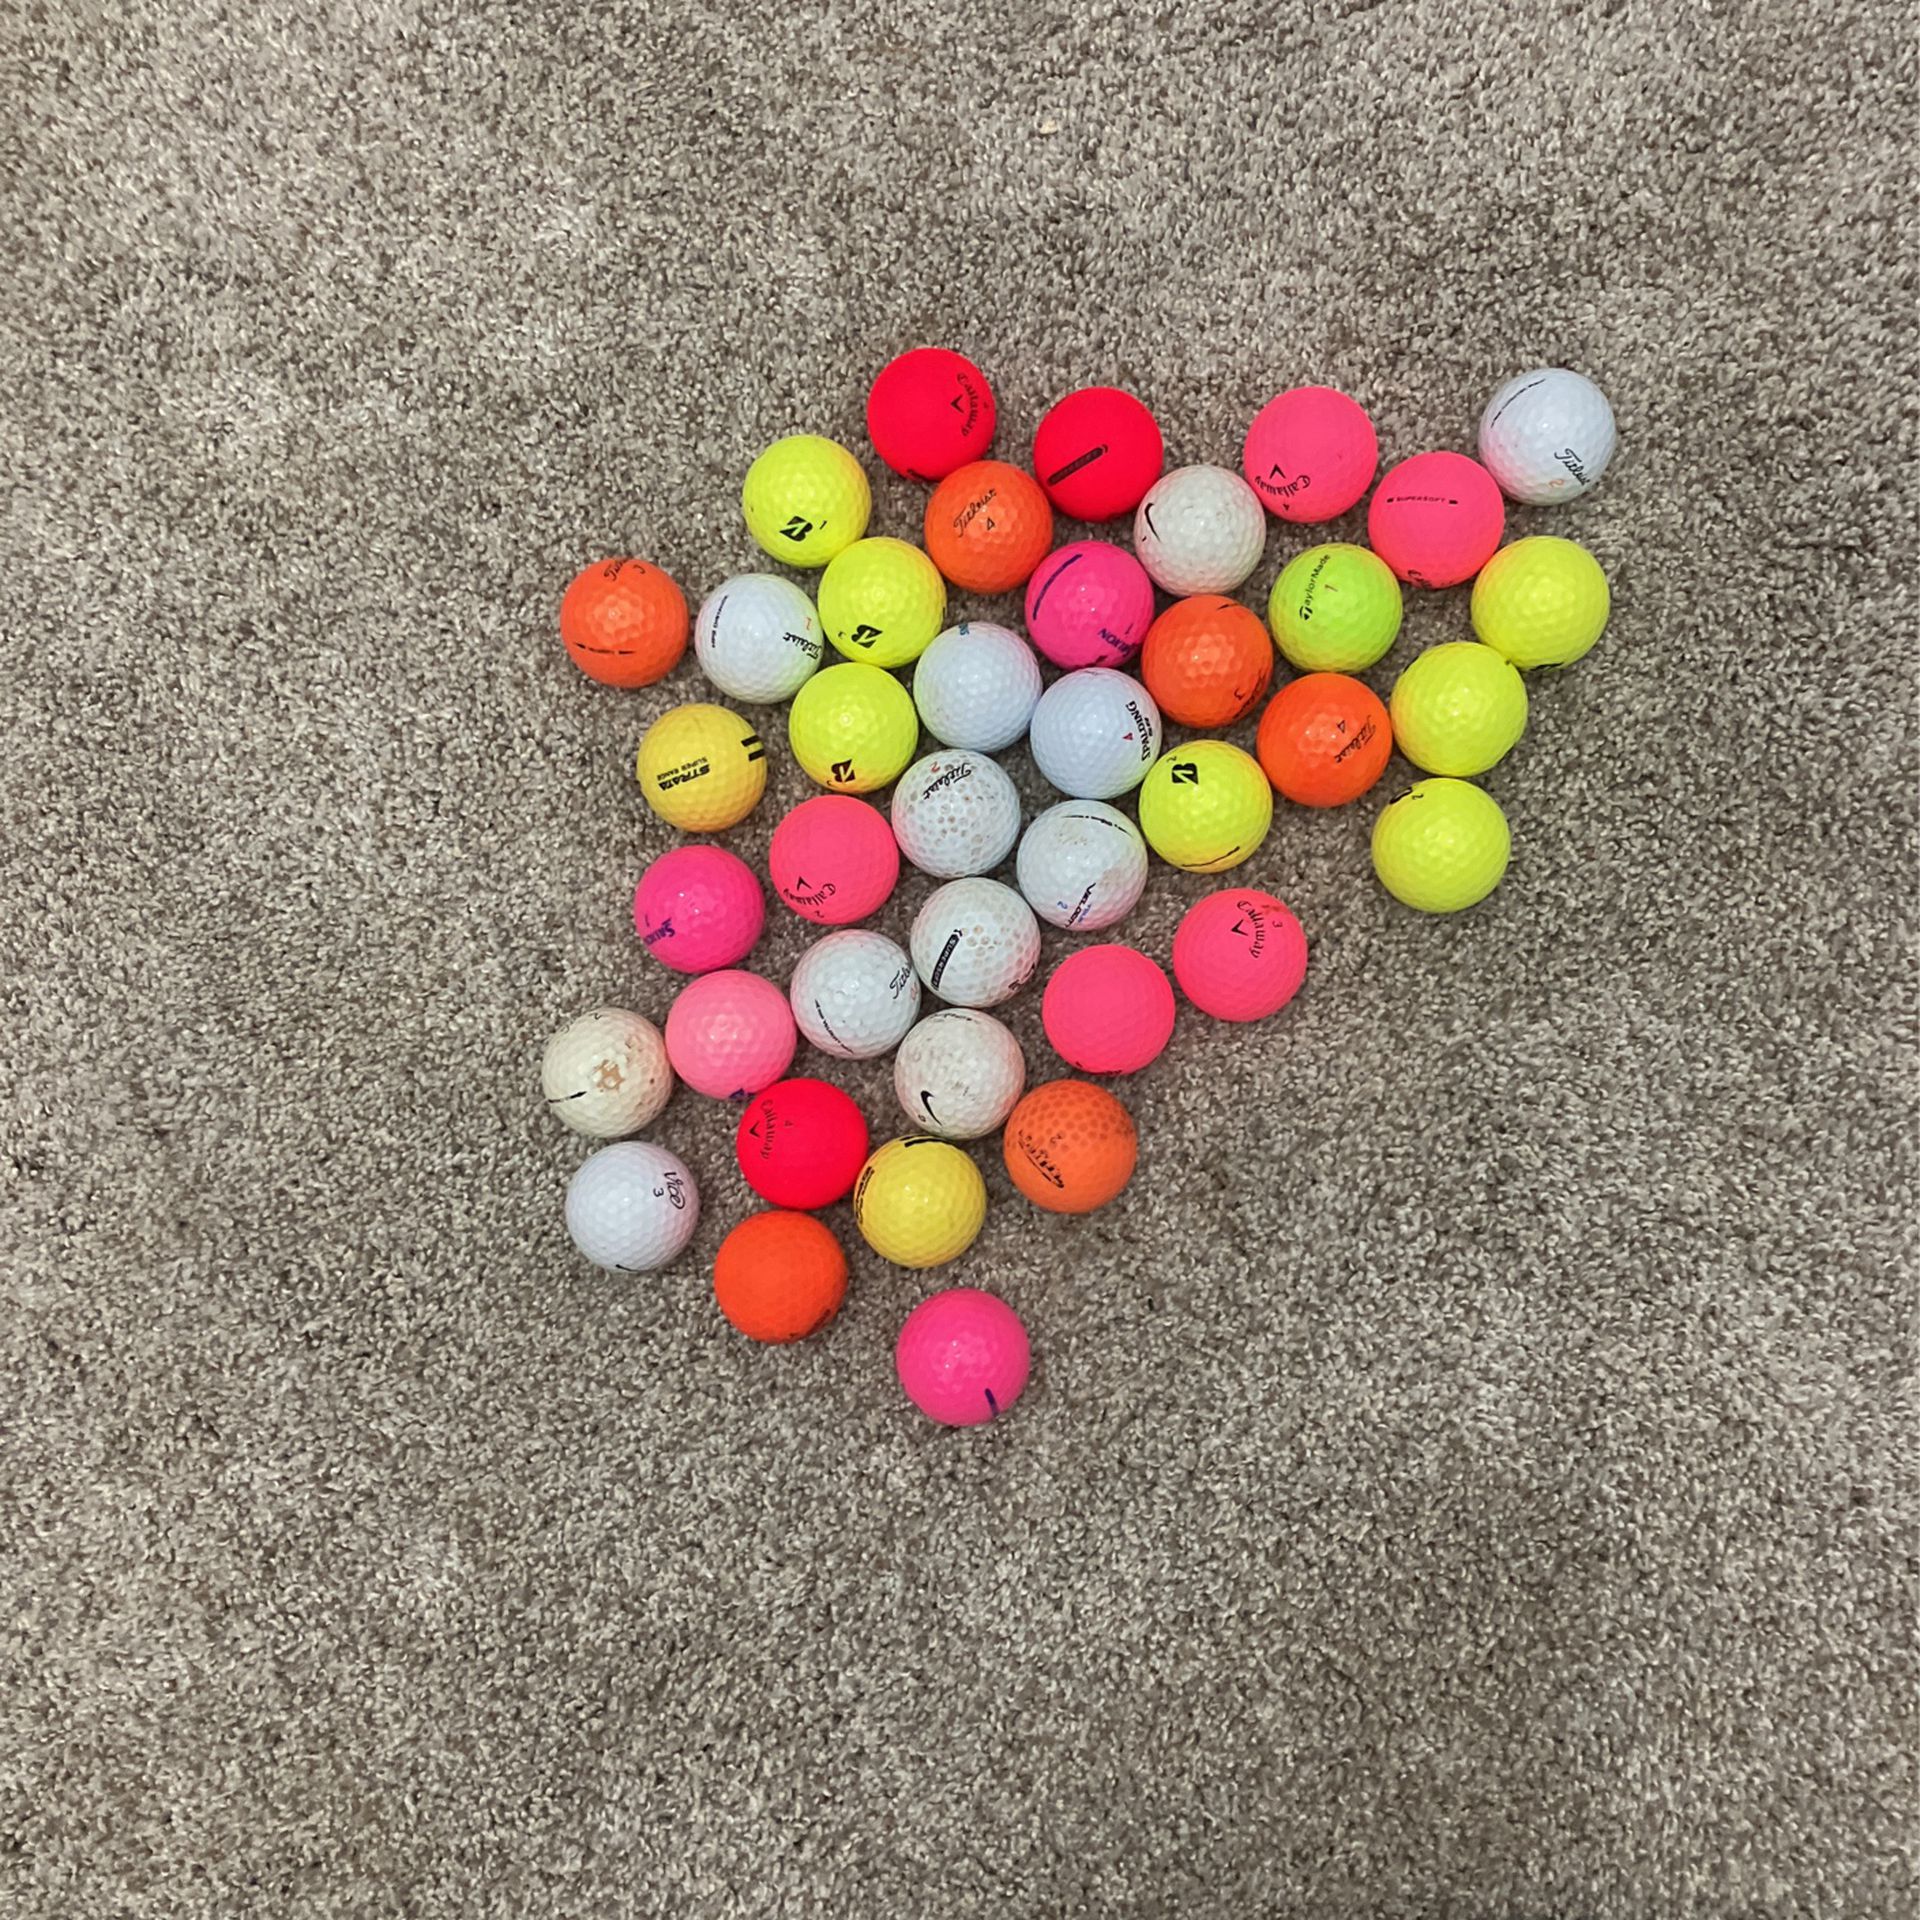 40 Some New And Used Golf Balls